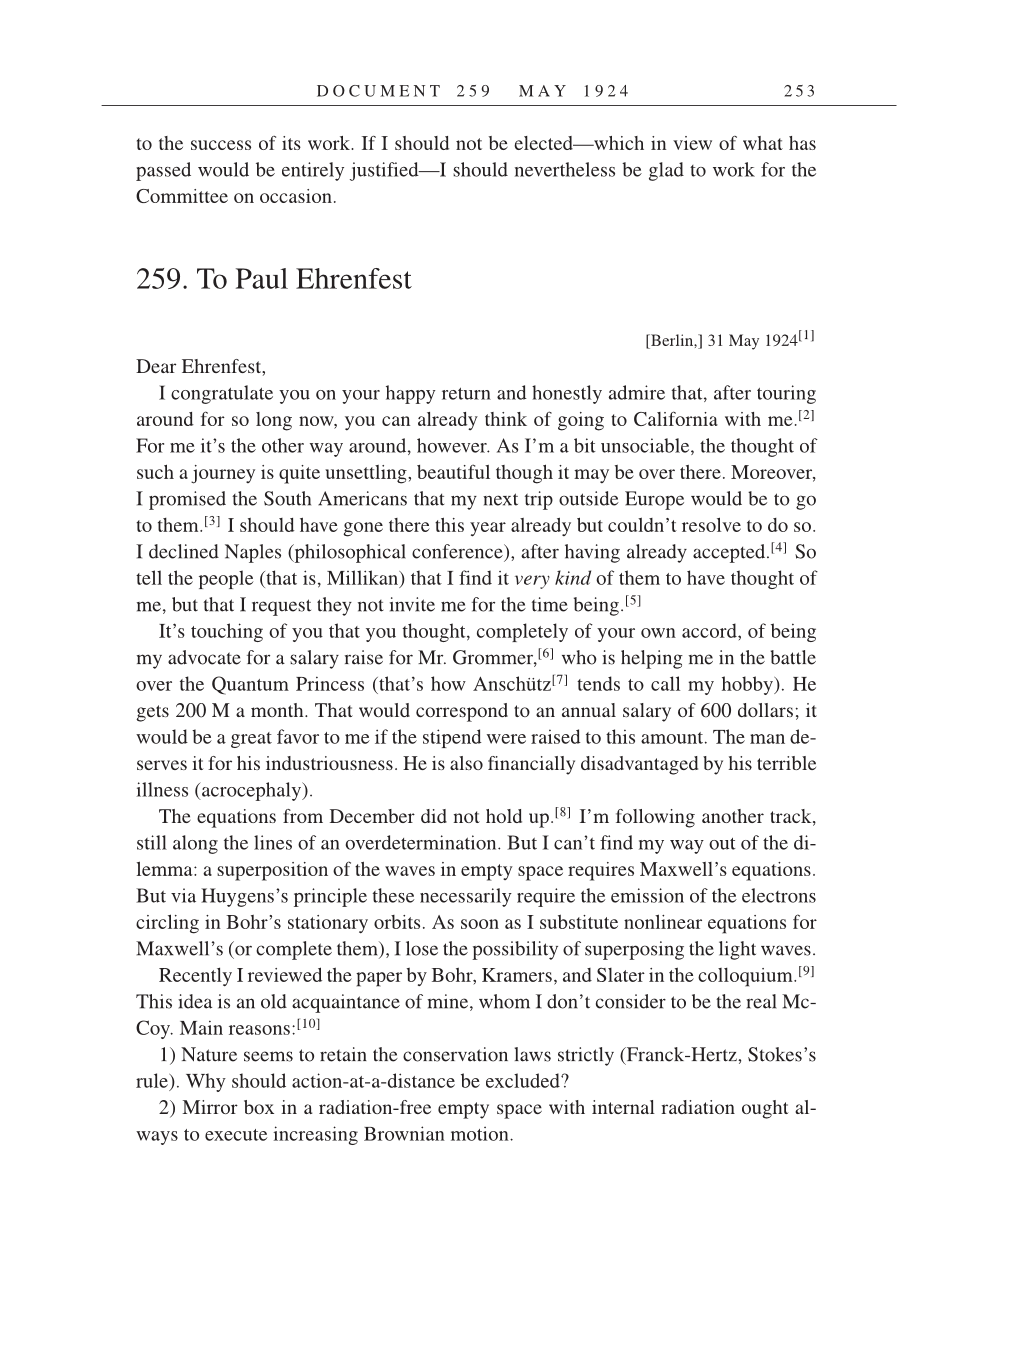 Volume 14: The Berlin Years: Writings & Correspondence, April 1923-May 1925 (English Translation Supplement) page 253